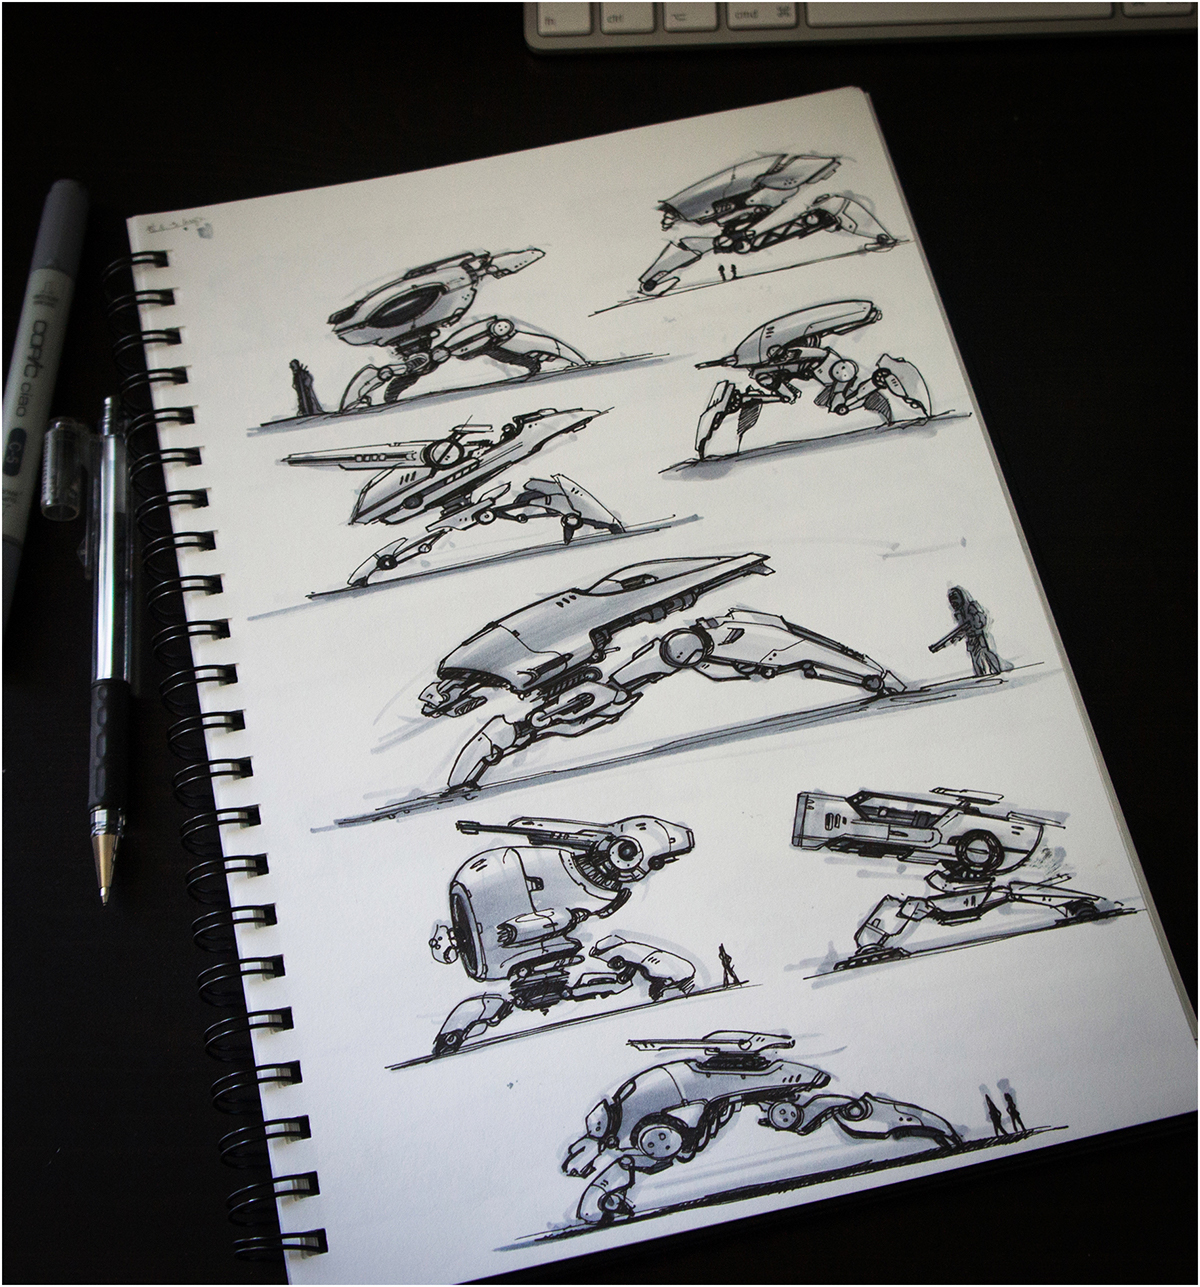 sketch Copic Marker Thumbs thumbnails concepts sci-fi robots Mechas spaceships vehicles characters sketchbook Oliver Hubertus  sketches